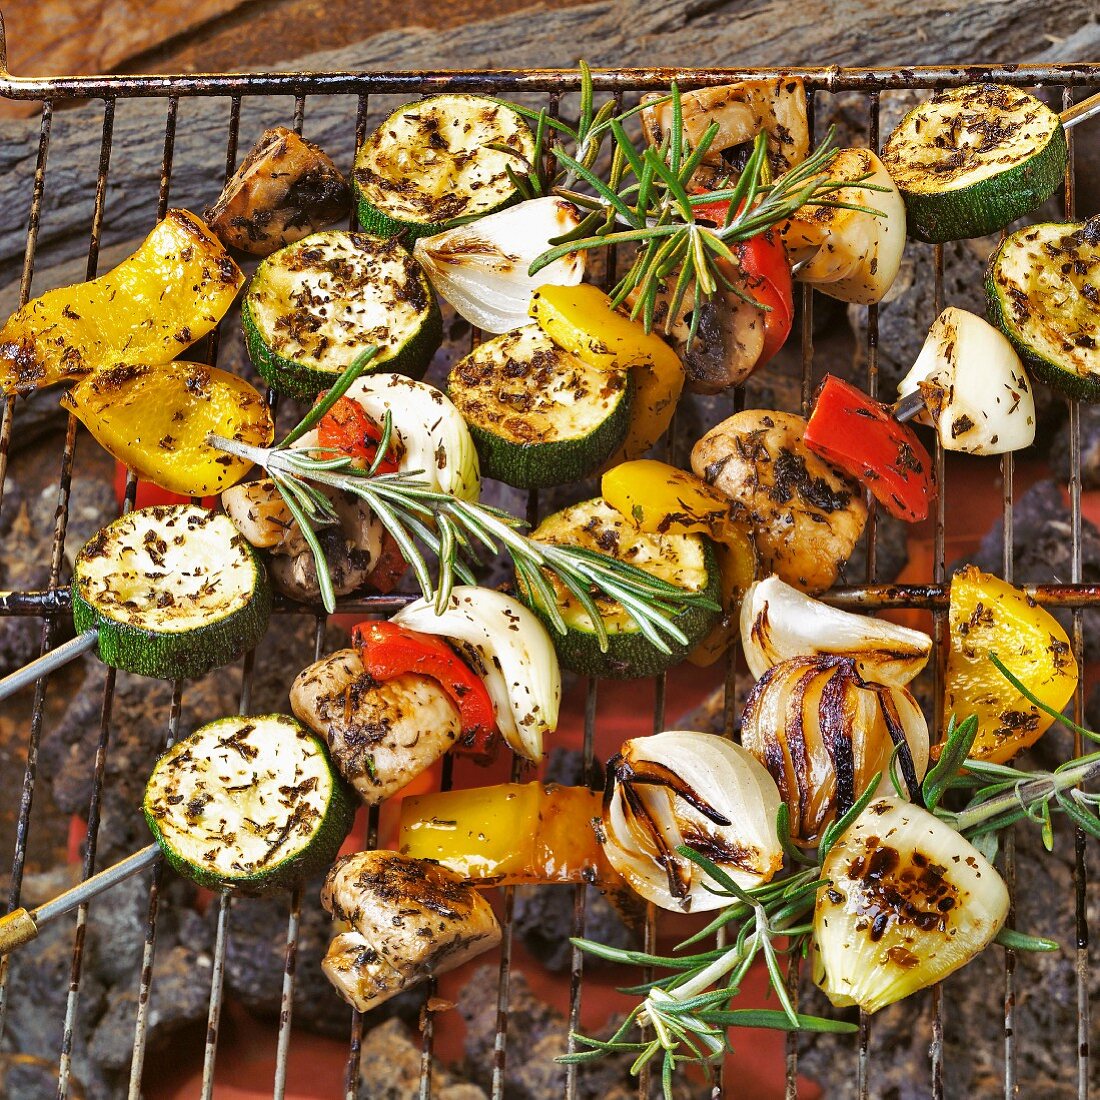 Vegetable kebabs on the barbecue